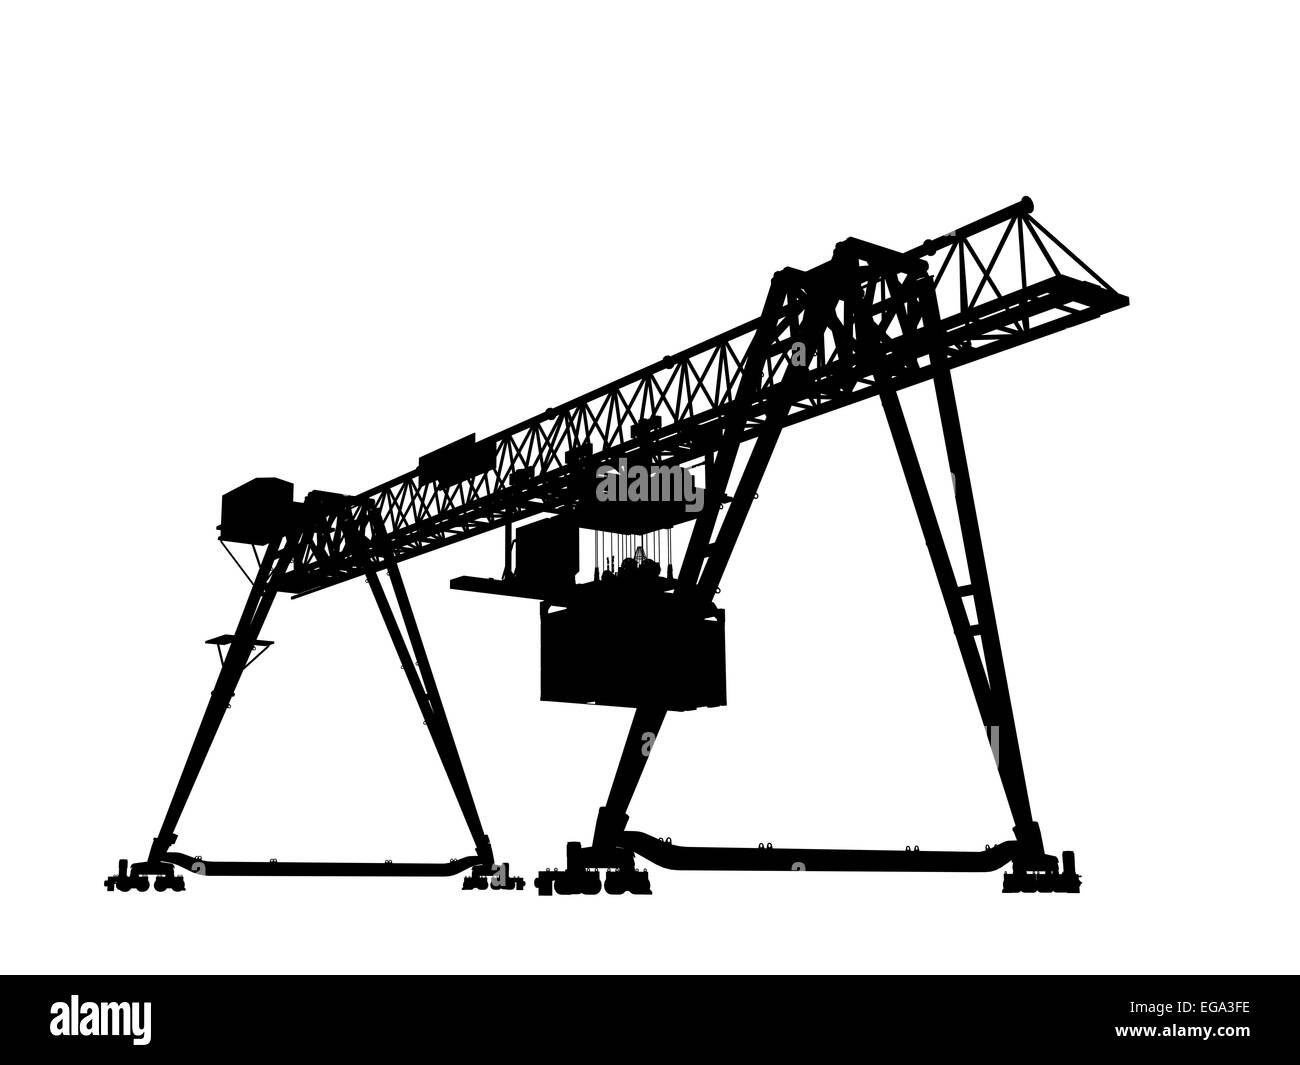 Container bridge gantry crane. Black silhouette isolated on white background, render of 3d model, wide angle perspective view Stock Photo